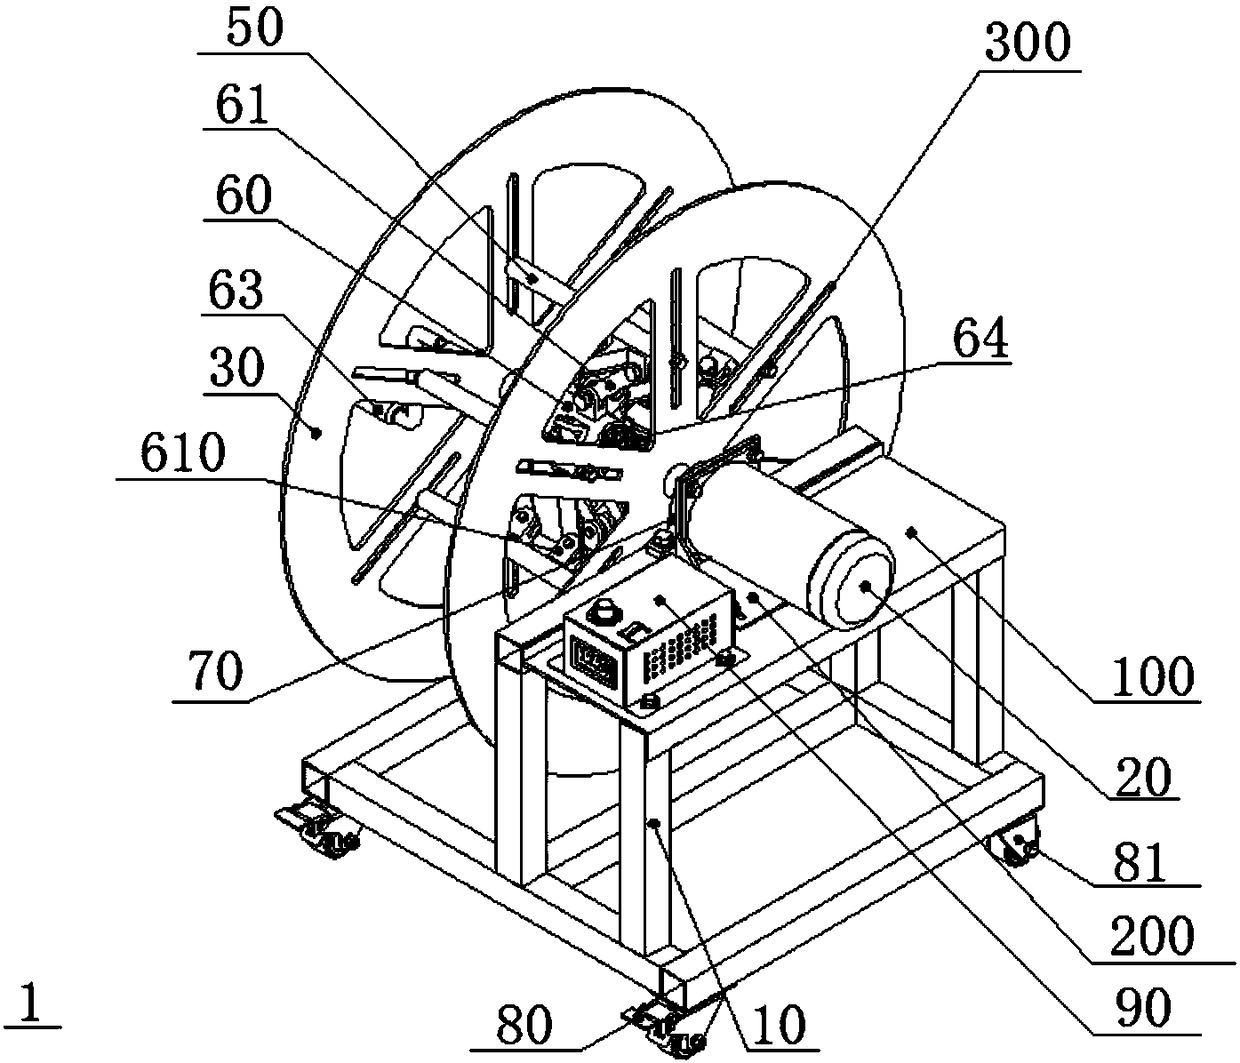 Cable winding and unwinding device and power line repairing equipment